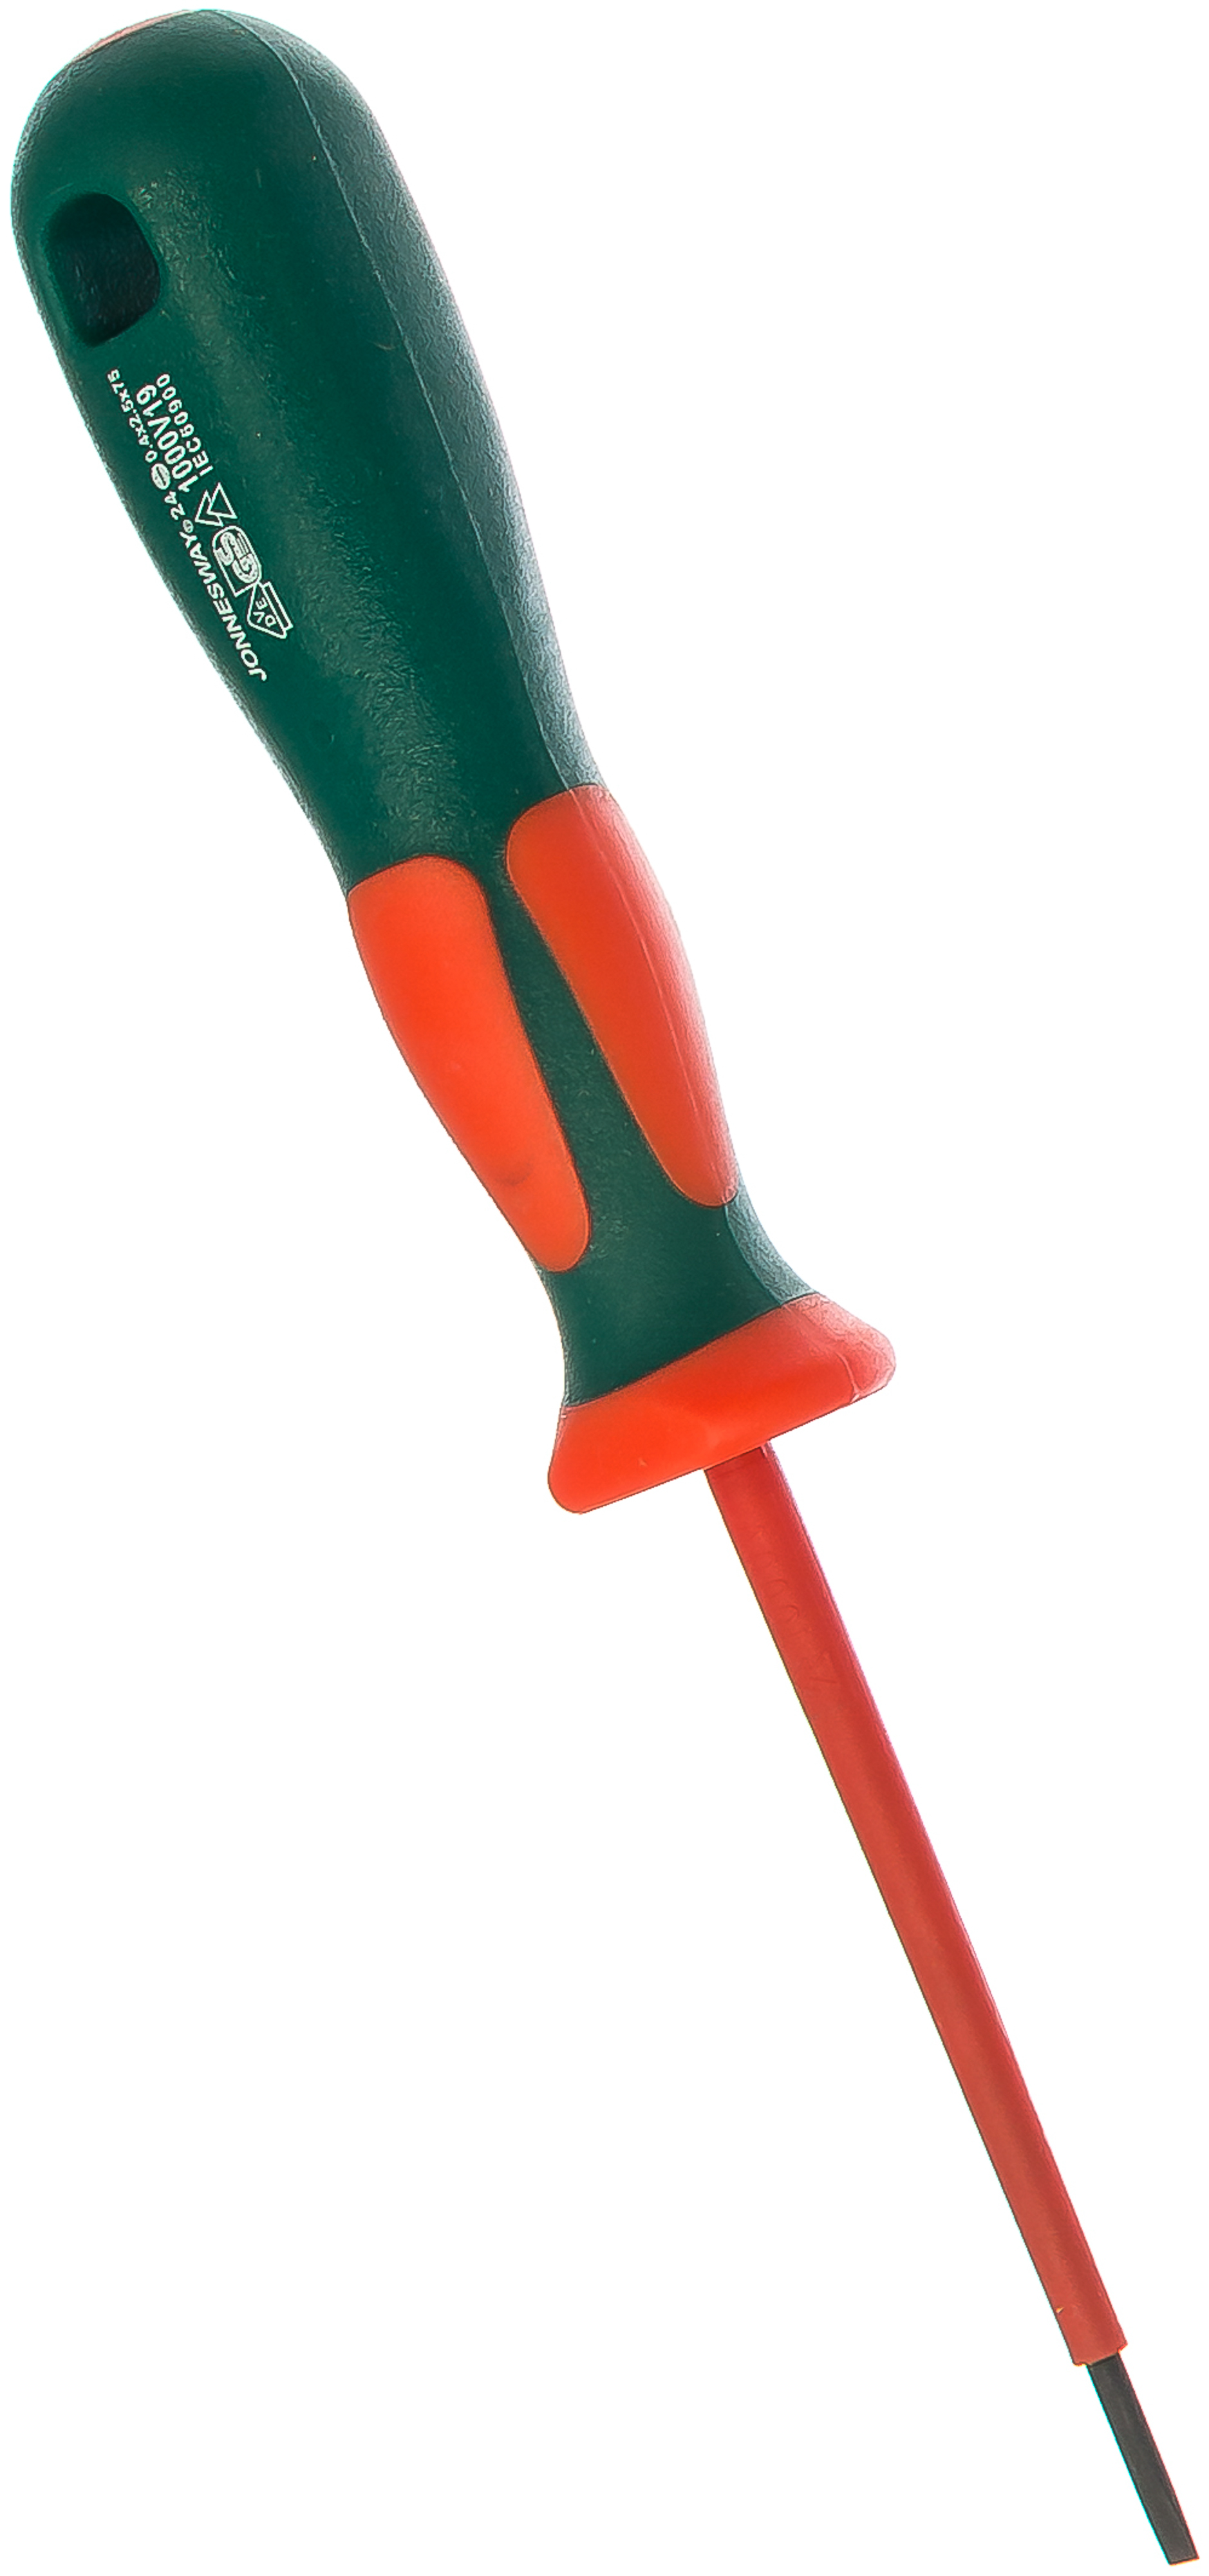 1000V INSULATED SCREWDRIVERS GS & VDE APPROVED 2.5X75MM DV13S275 - Click Image to Close